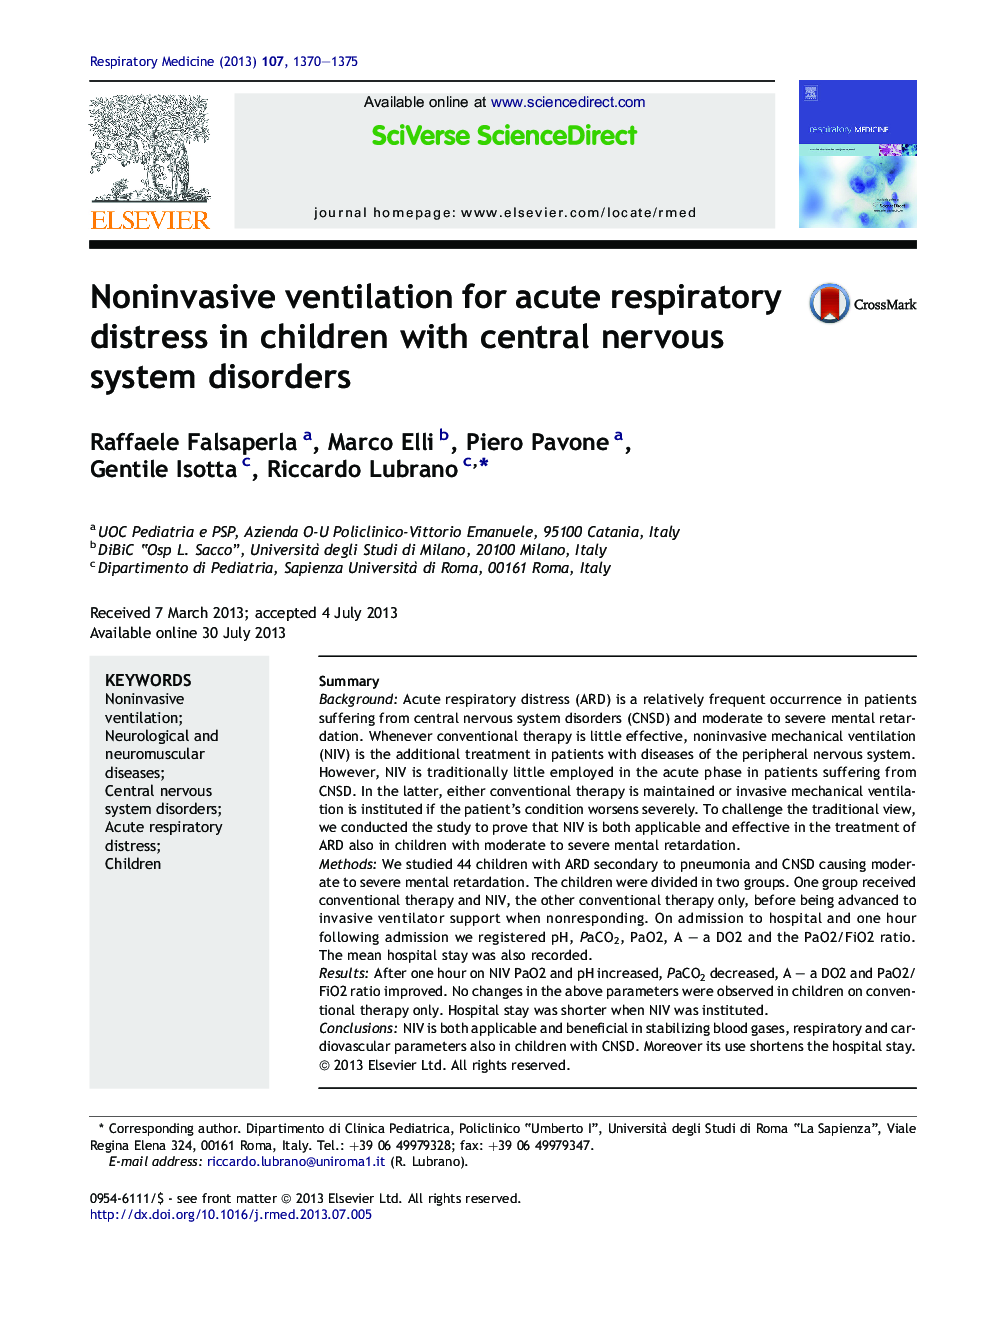 Noninvasive ventilation for acute respiratory distress in children with central nervous system disorders